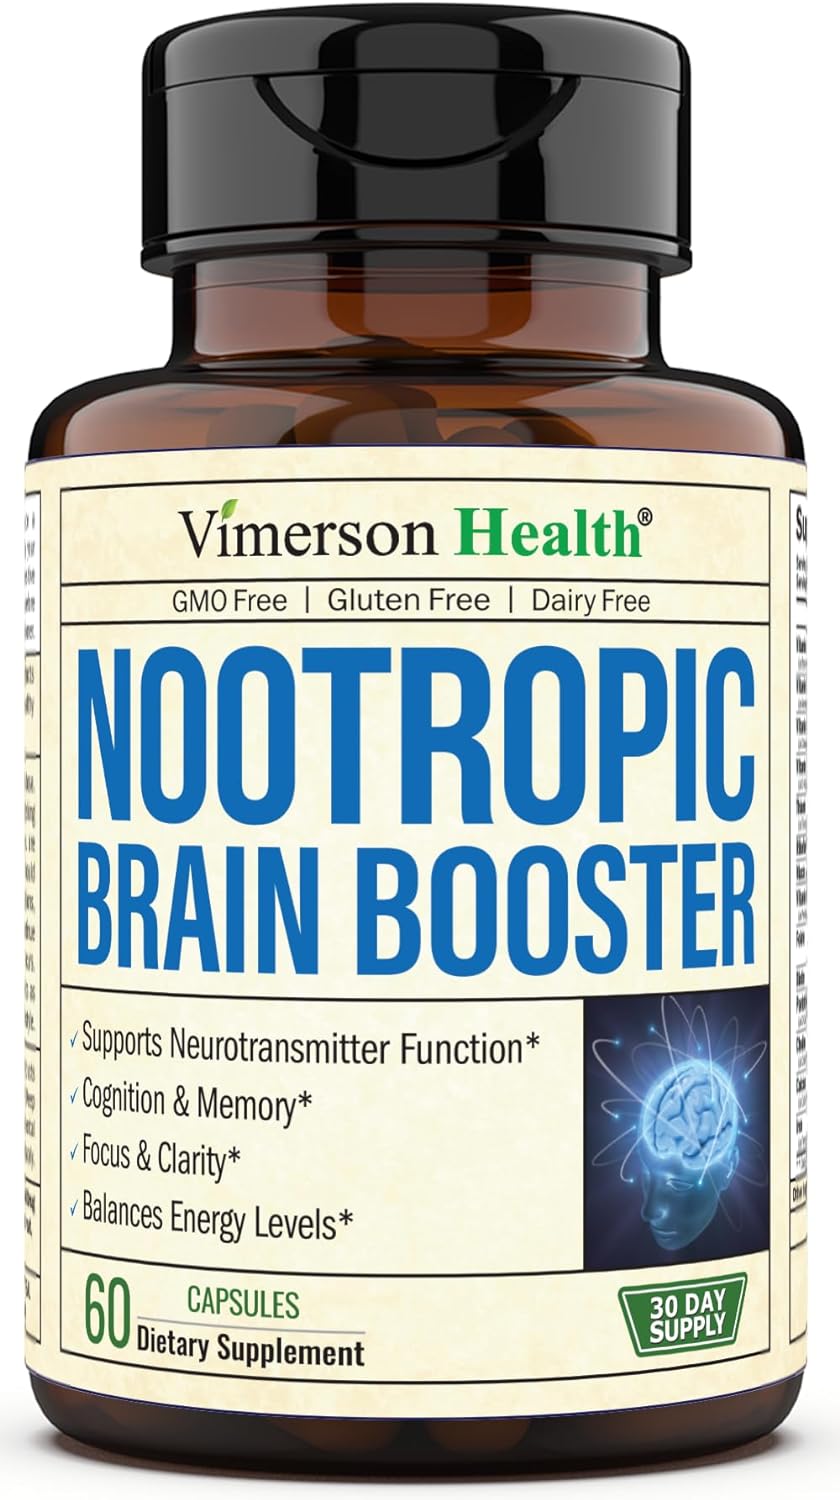 Nootropics Brain Support Supplement - Nootropic Brain Booster for Improved Focus, Concentration & Memory. Brain Nootropic for Brain Health, Mood & Energy Support. Non-GMO. Made in the USA. 60 Capsules